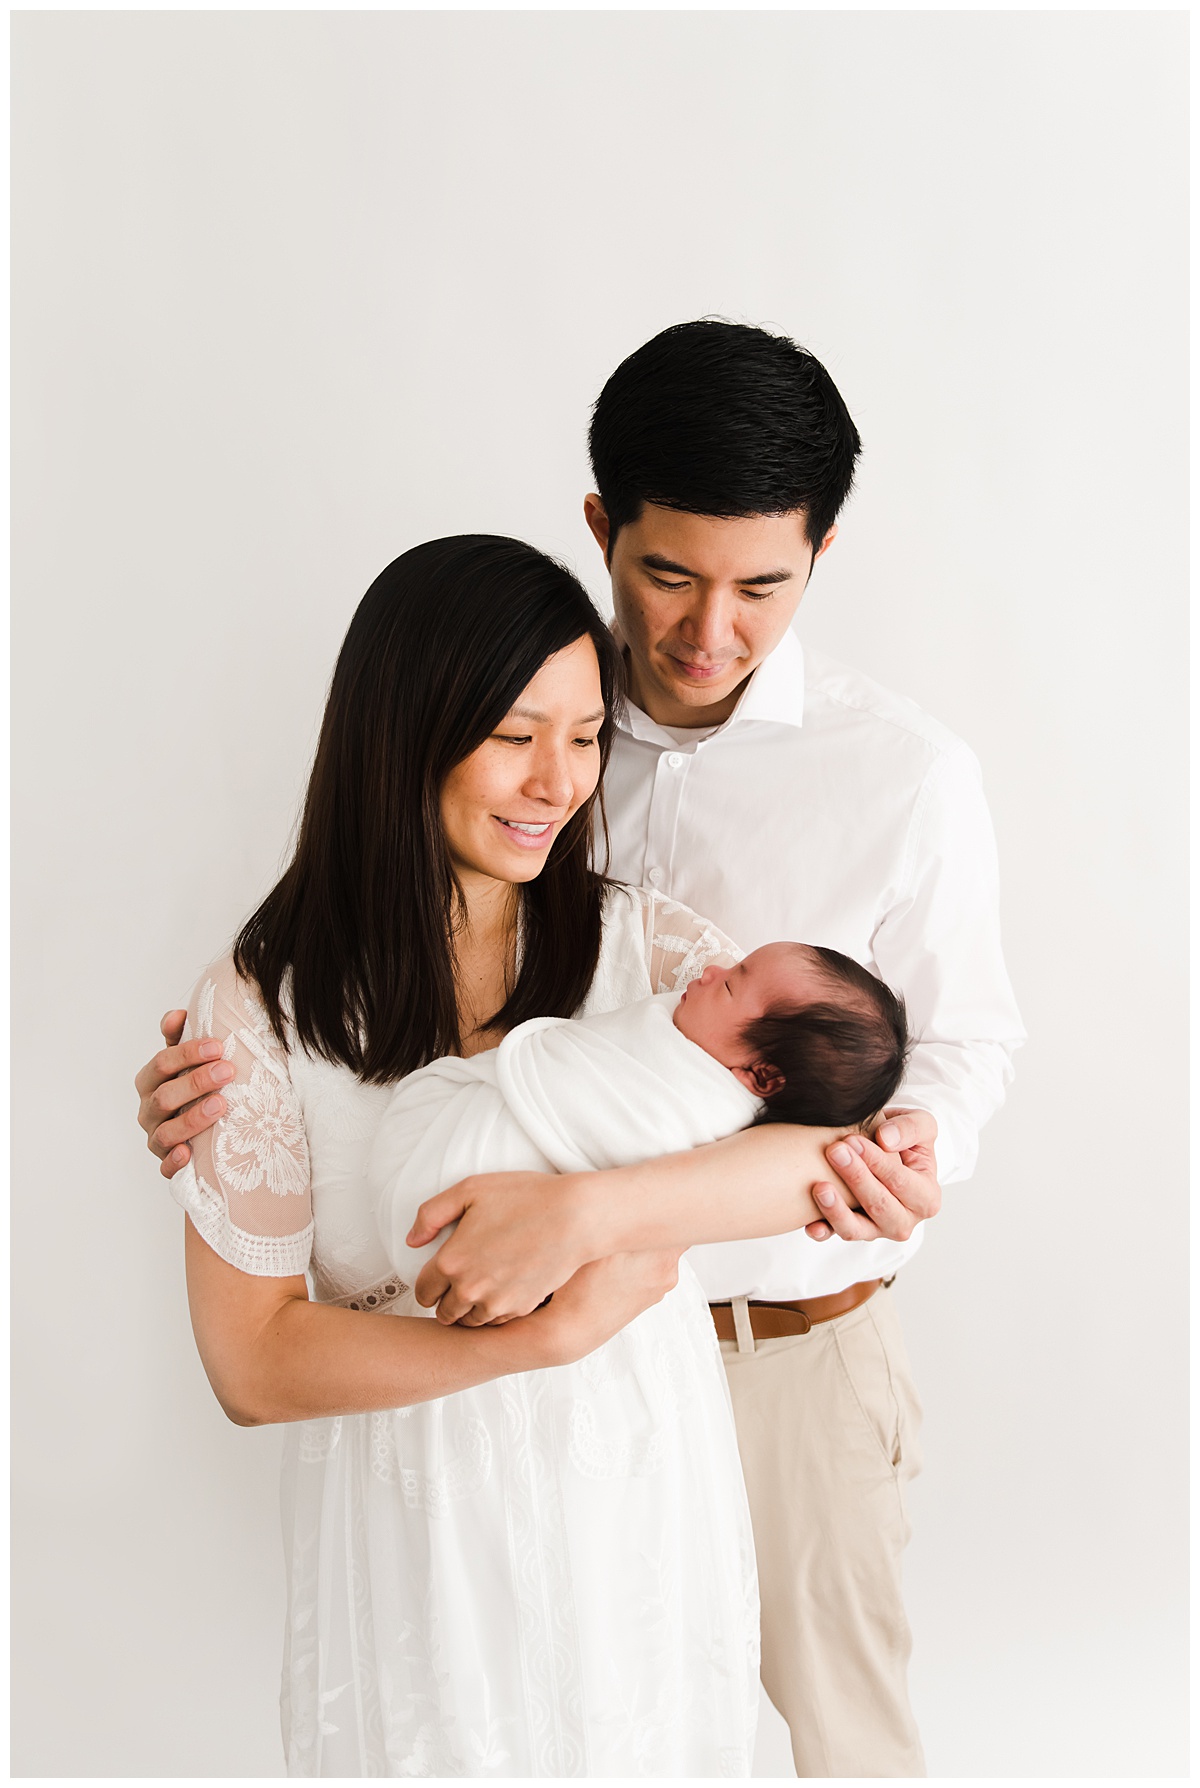 boston newborn photography session image of parents holding newborn in a white studio